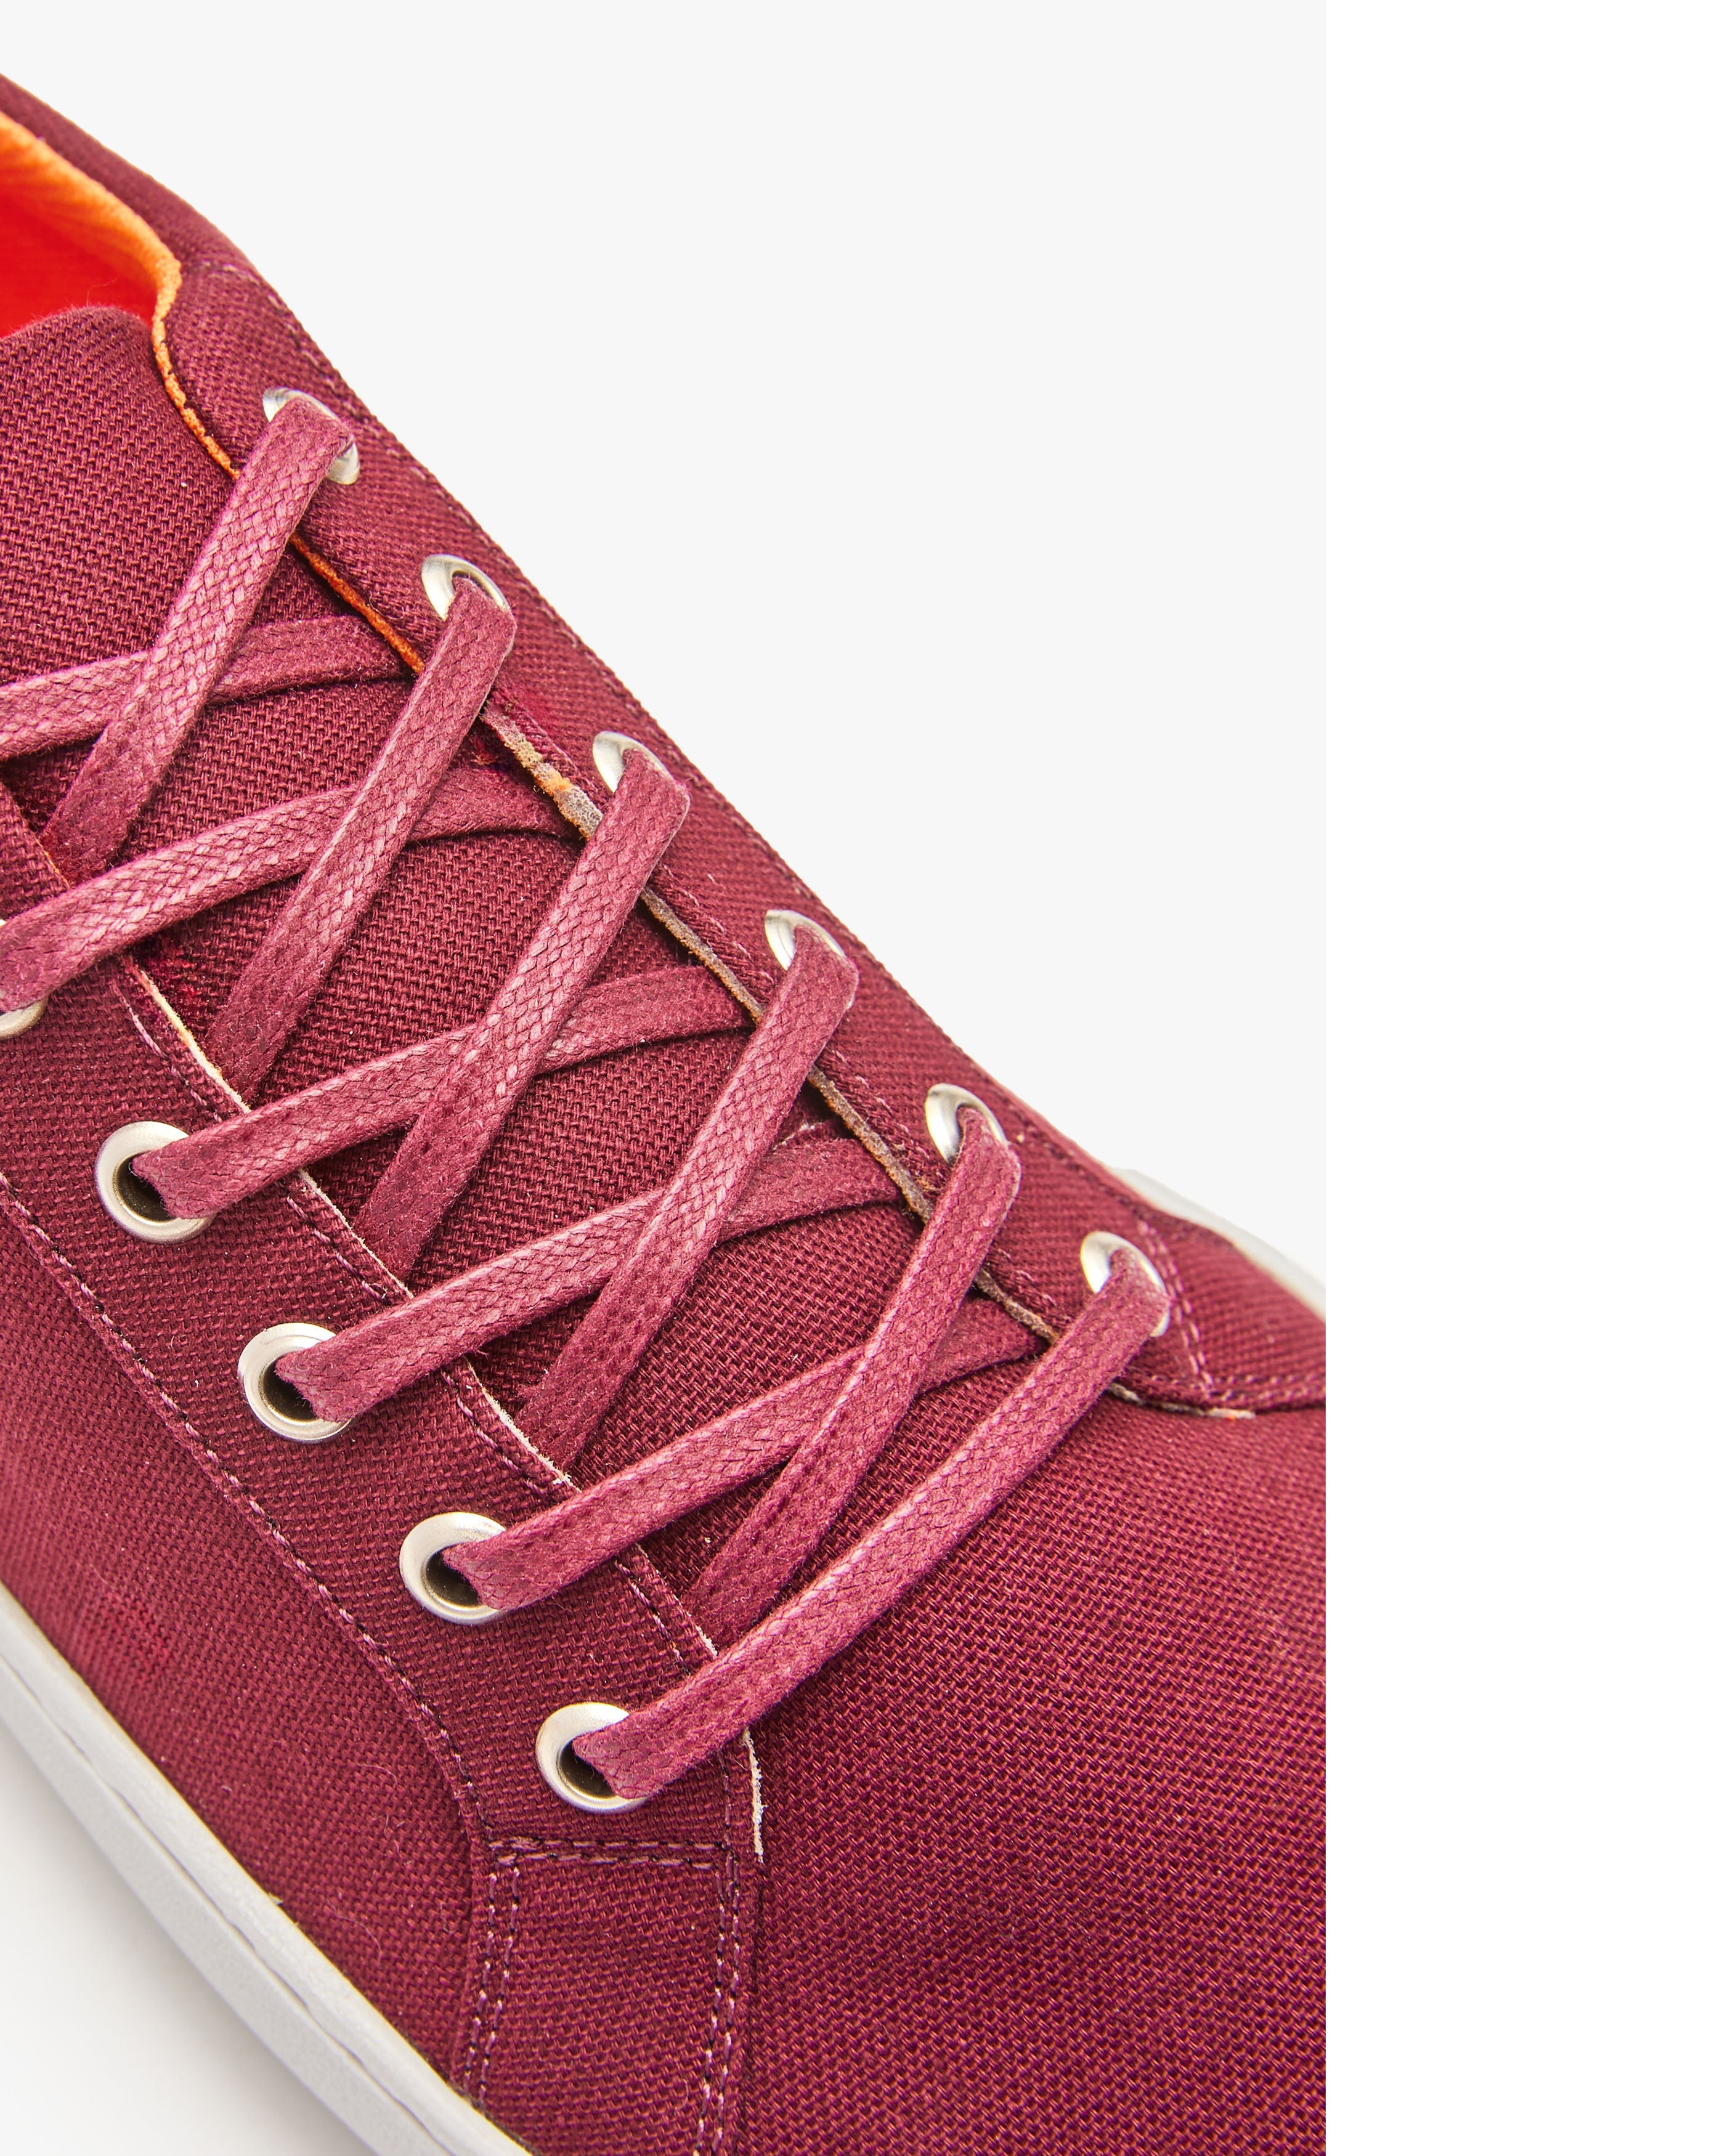 The Everyday Sneaker for Men | Gen 3 in Cotton Canvas-4